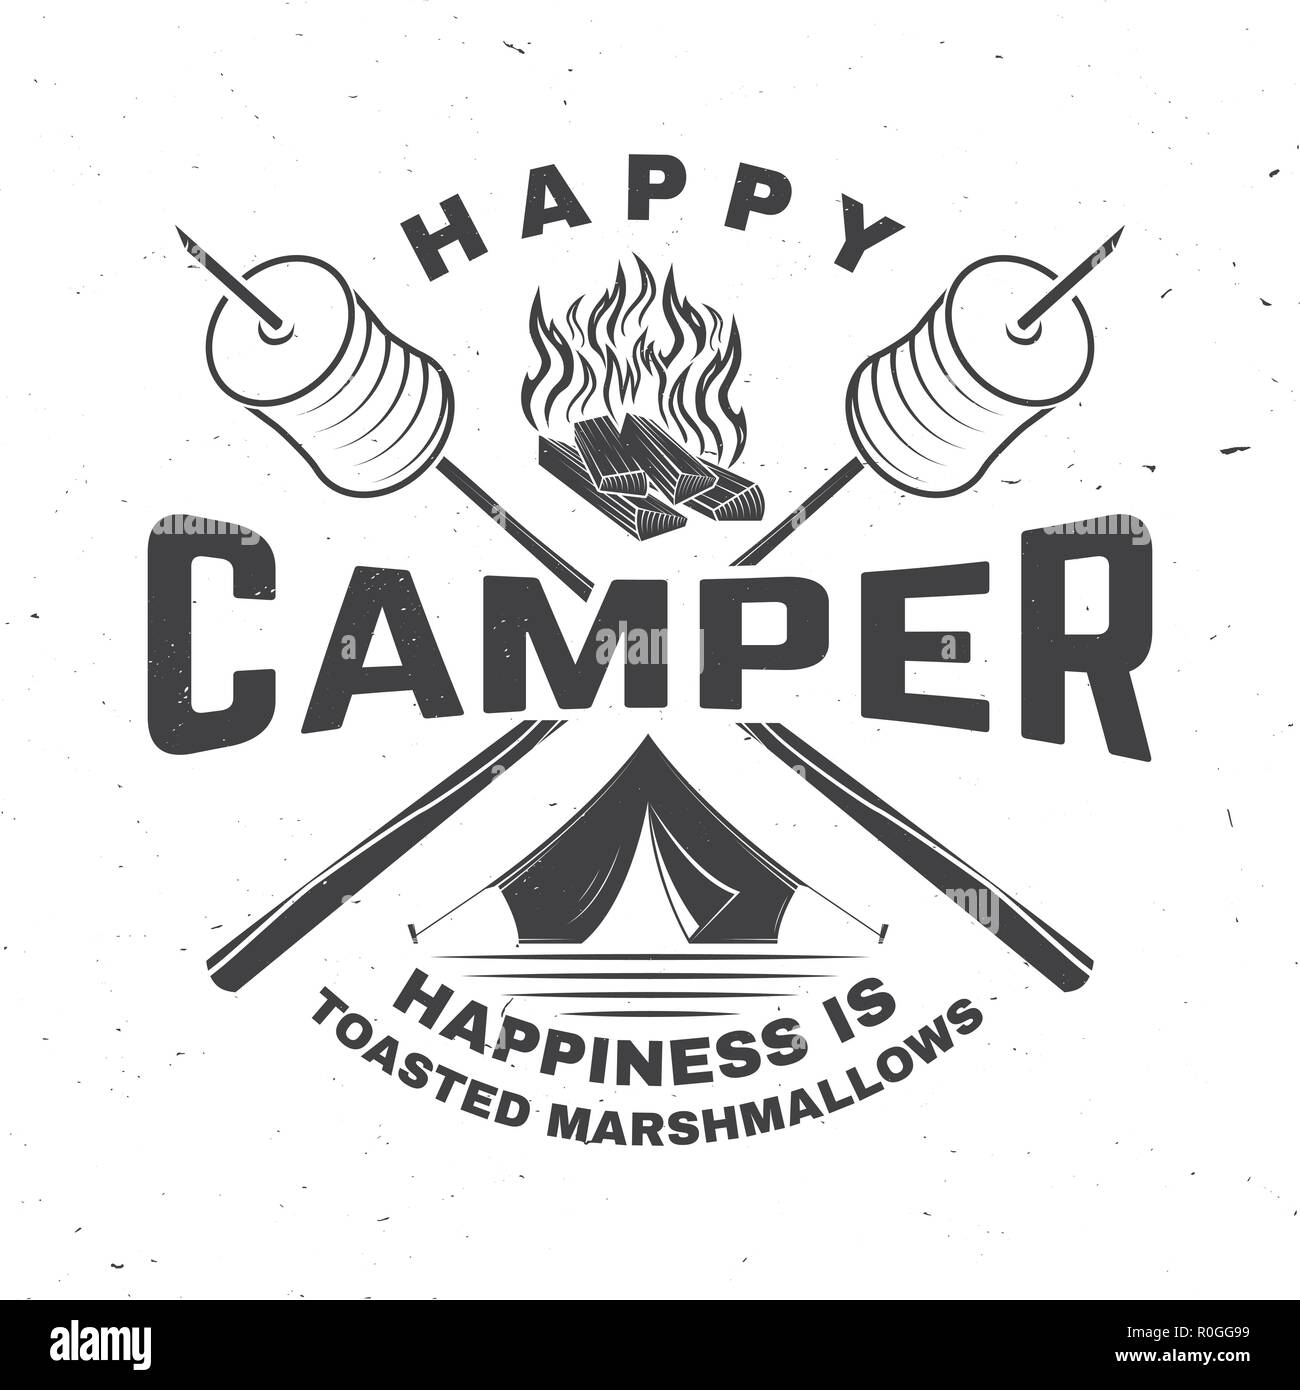 Happy camper. Happiness is toasted marshmallows. Vector illustration. Vintage typography design with camping tent, campfire, marshmallow on a stick silhouette. Concept for shirt or print, stamp or tee Stock Vector